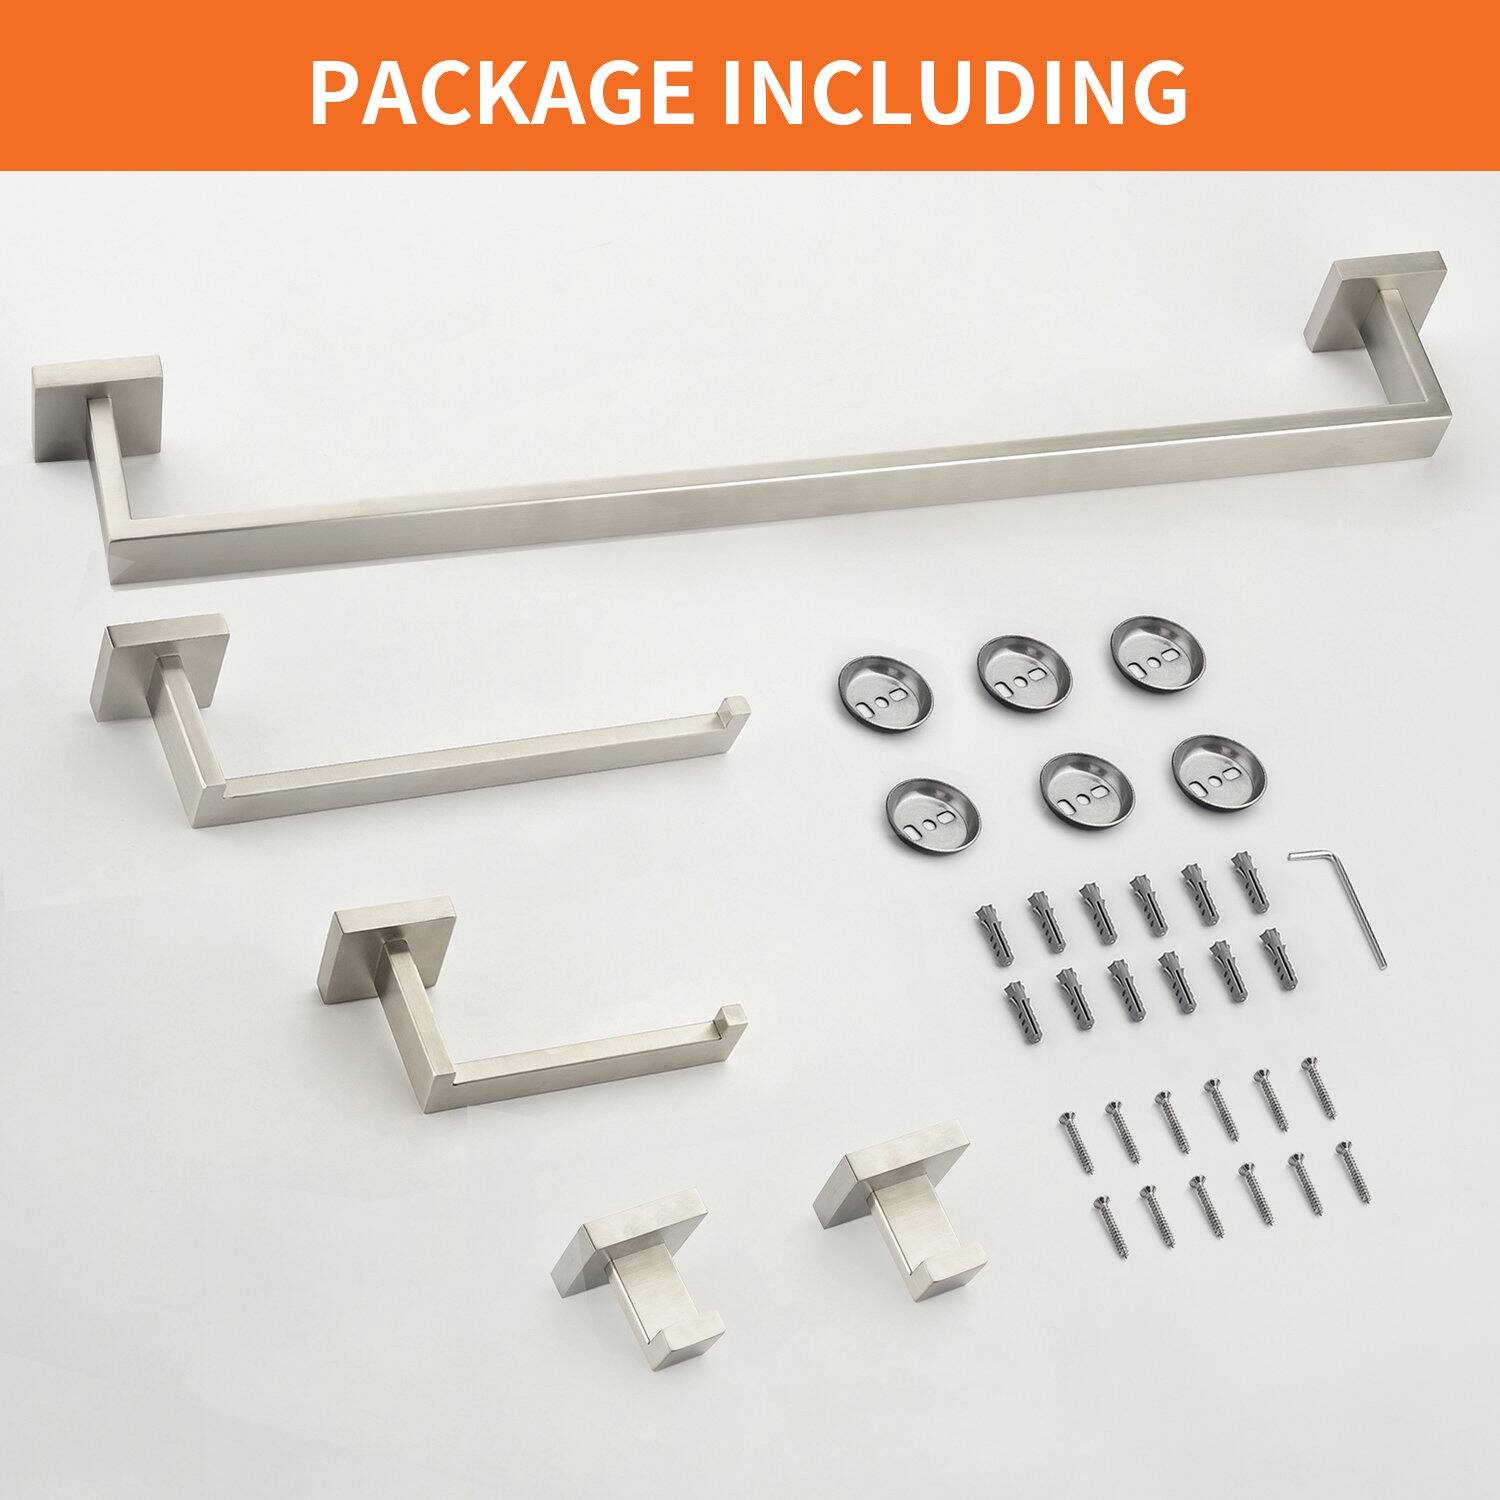 5-Piece Stainless Steel Square Bathroom Hardware Set